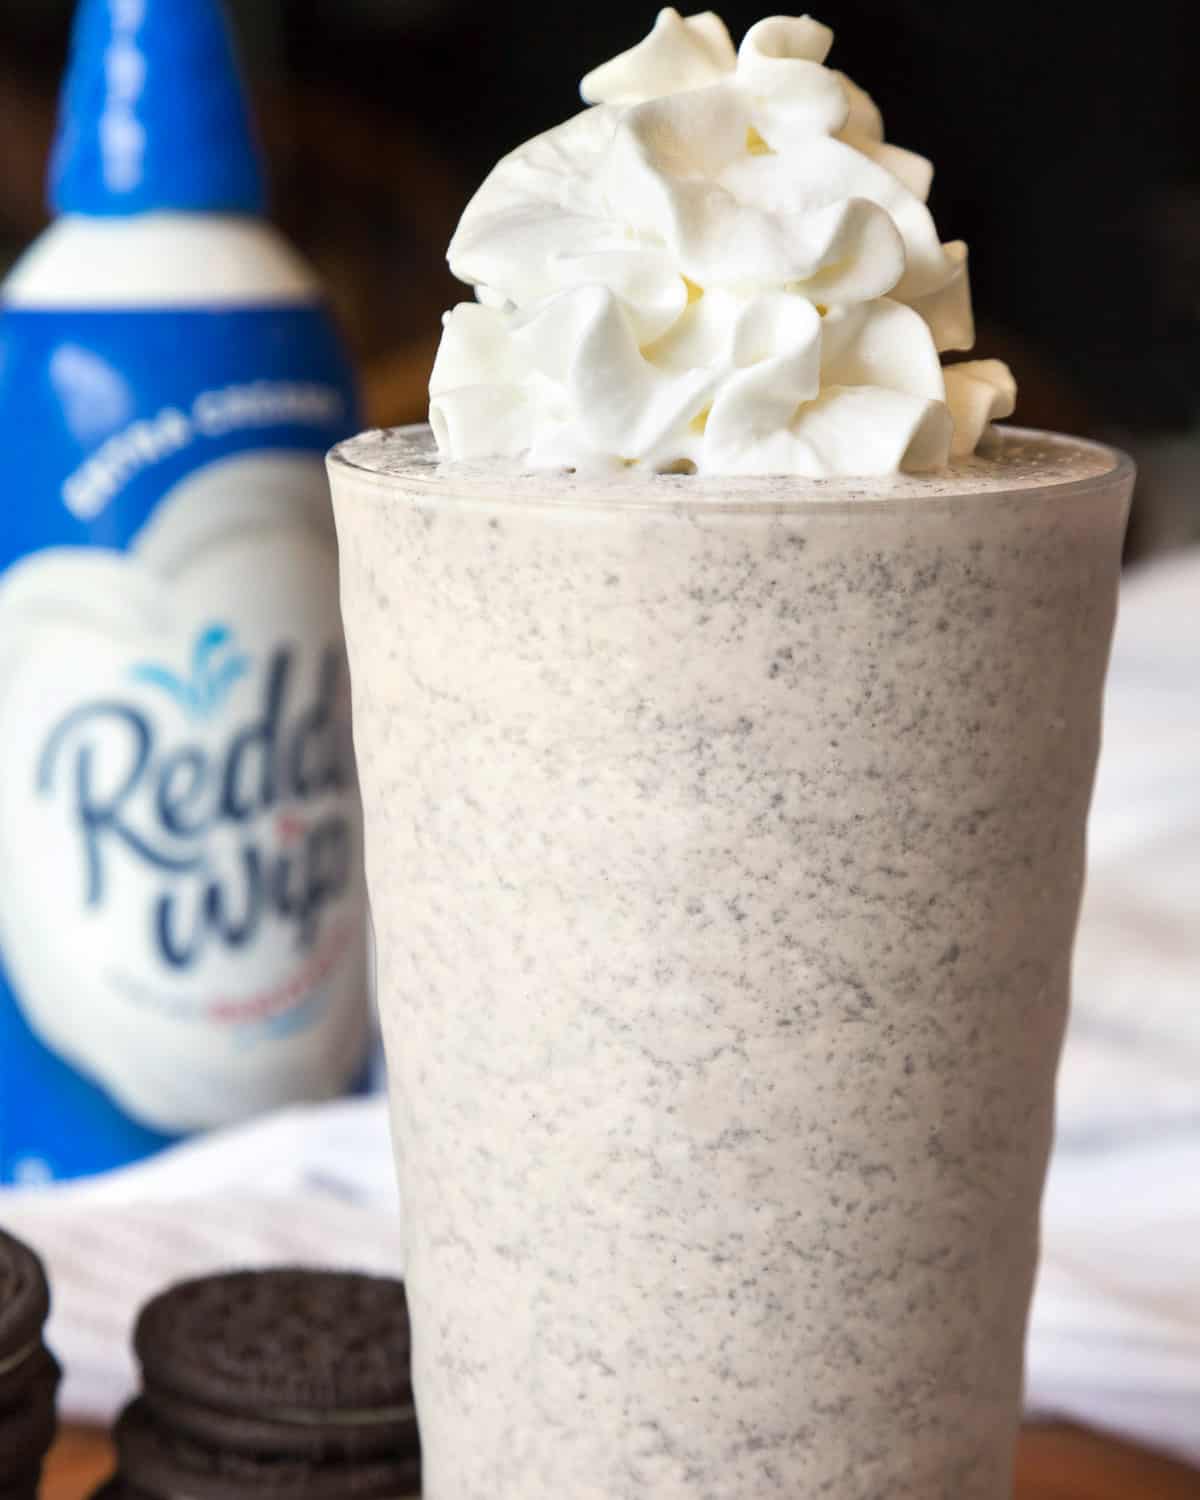 Oreo milkshake recipe with vanilla extract in a cup and topped with whipped cream.